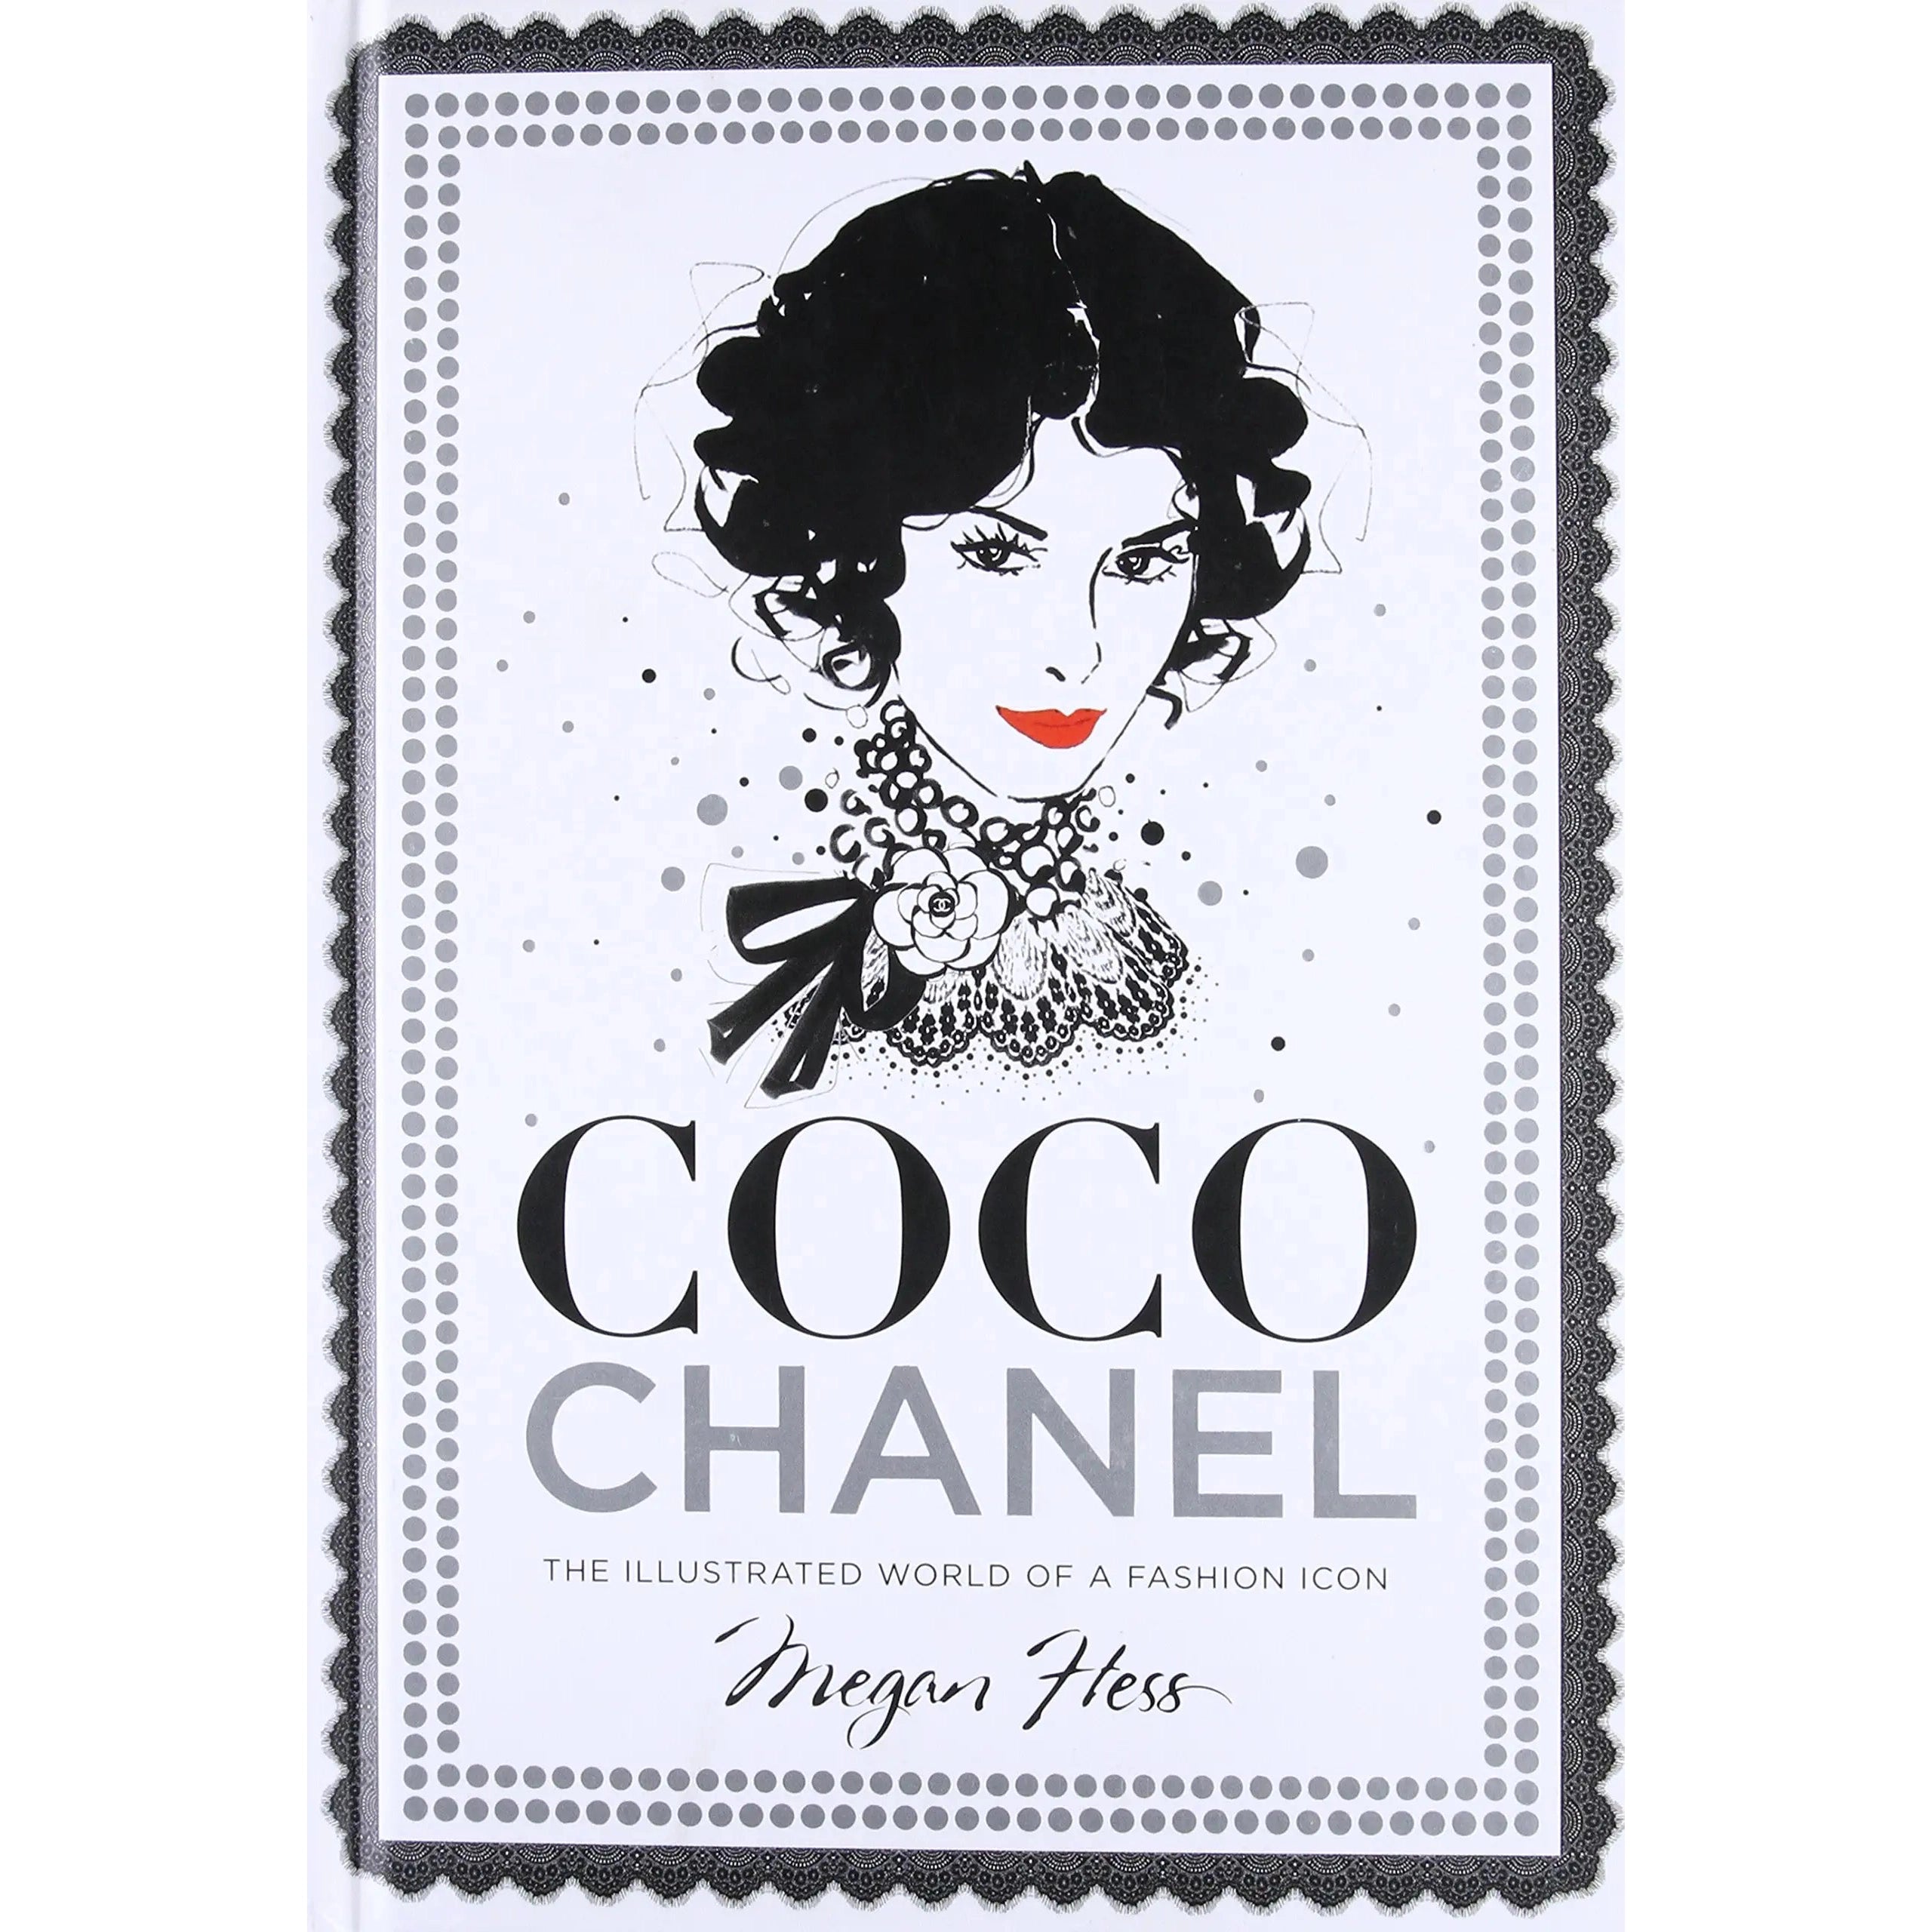 Must-Watch: 'Coco Before Chanel' - The Woman Who Built A Fashion Empire By  Destroying Fashion